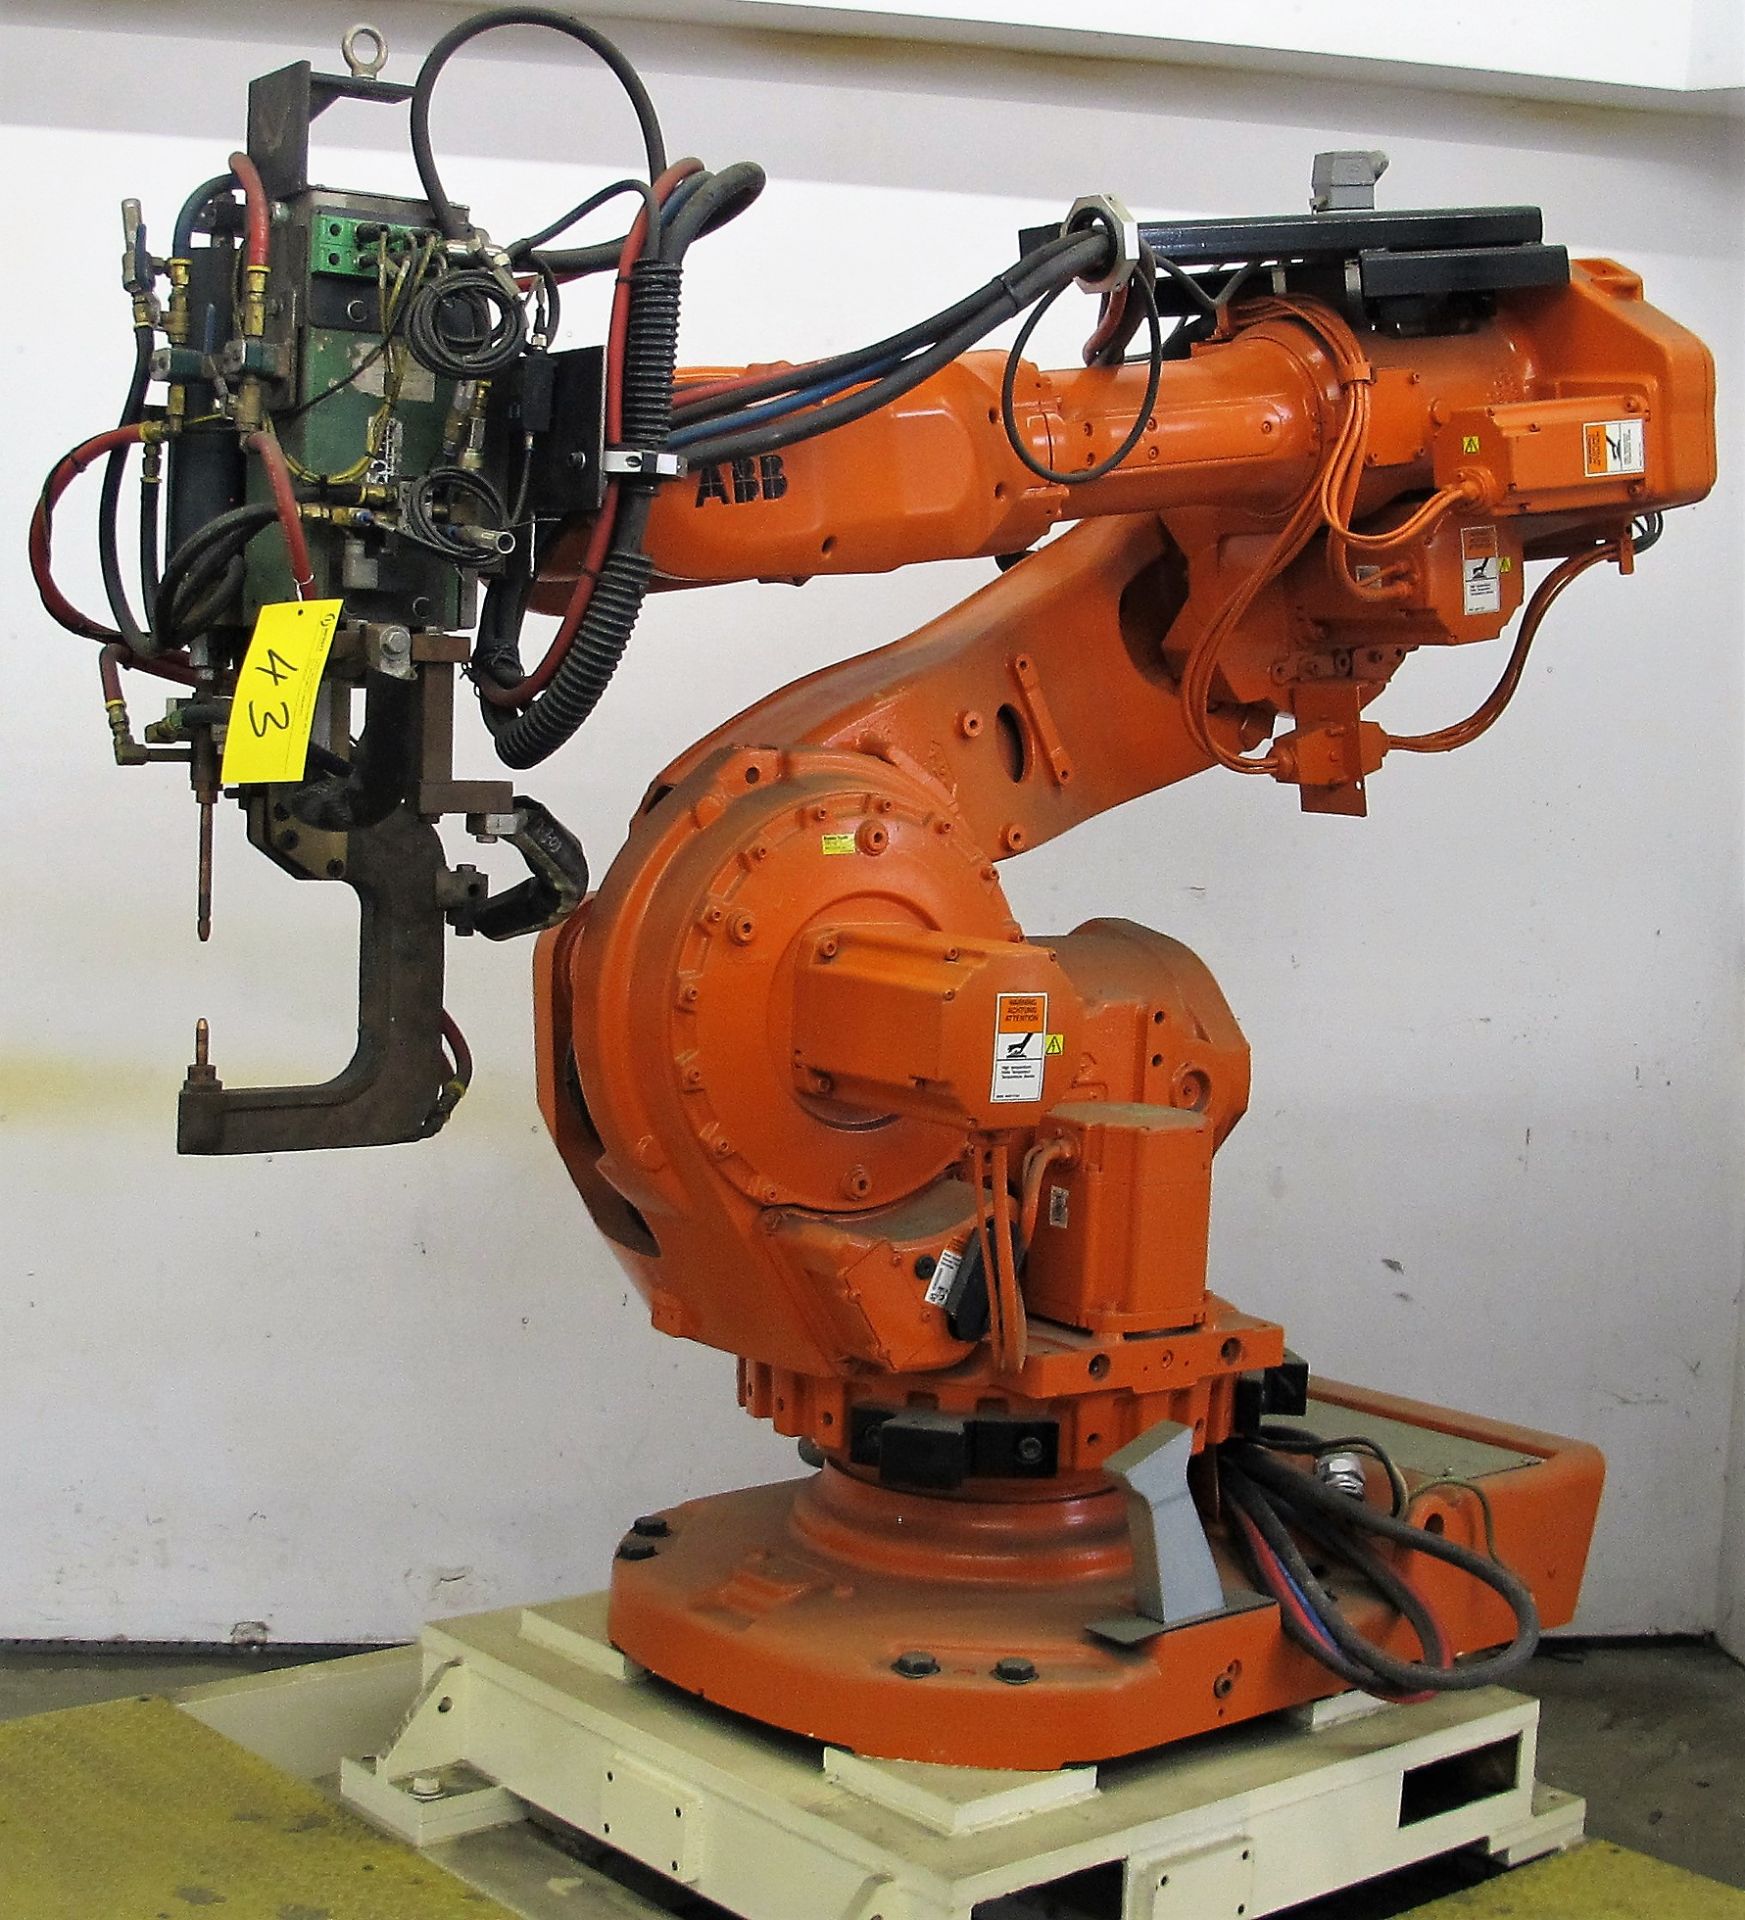 ROBOTIC WELDING CELL CONSISTING OF: ABB IRB 6600 M2004 6-AXIS ROBOT (REFURBISHED IN 2014), S/N 66- - Image 2 of 22